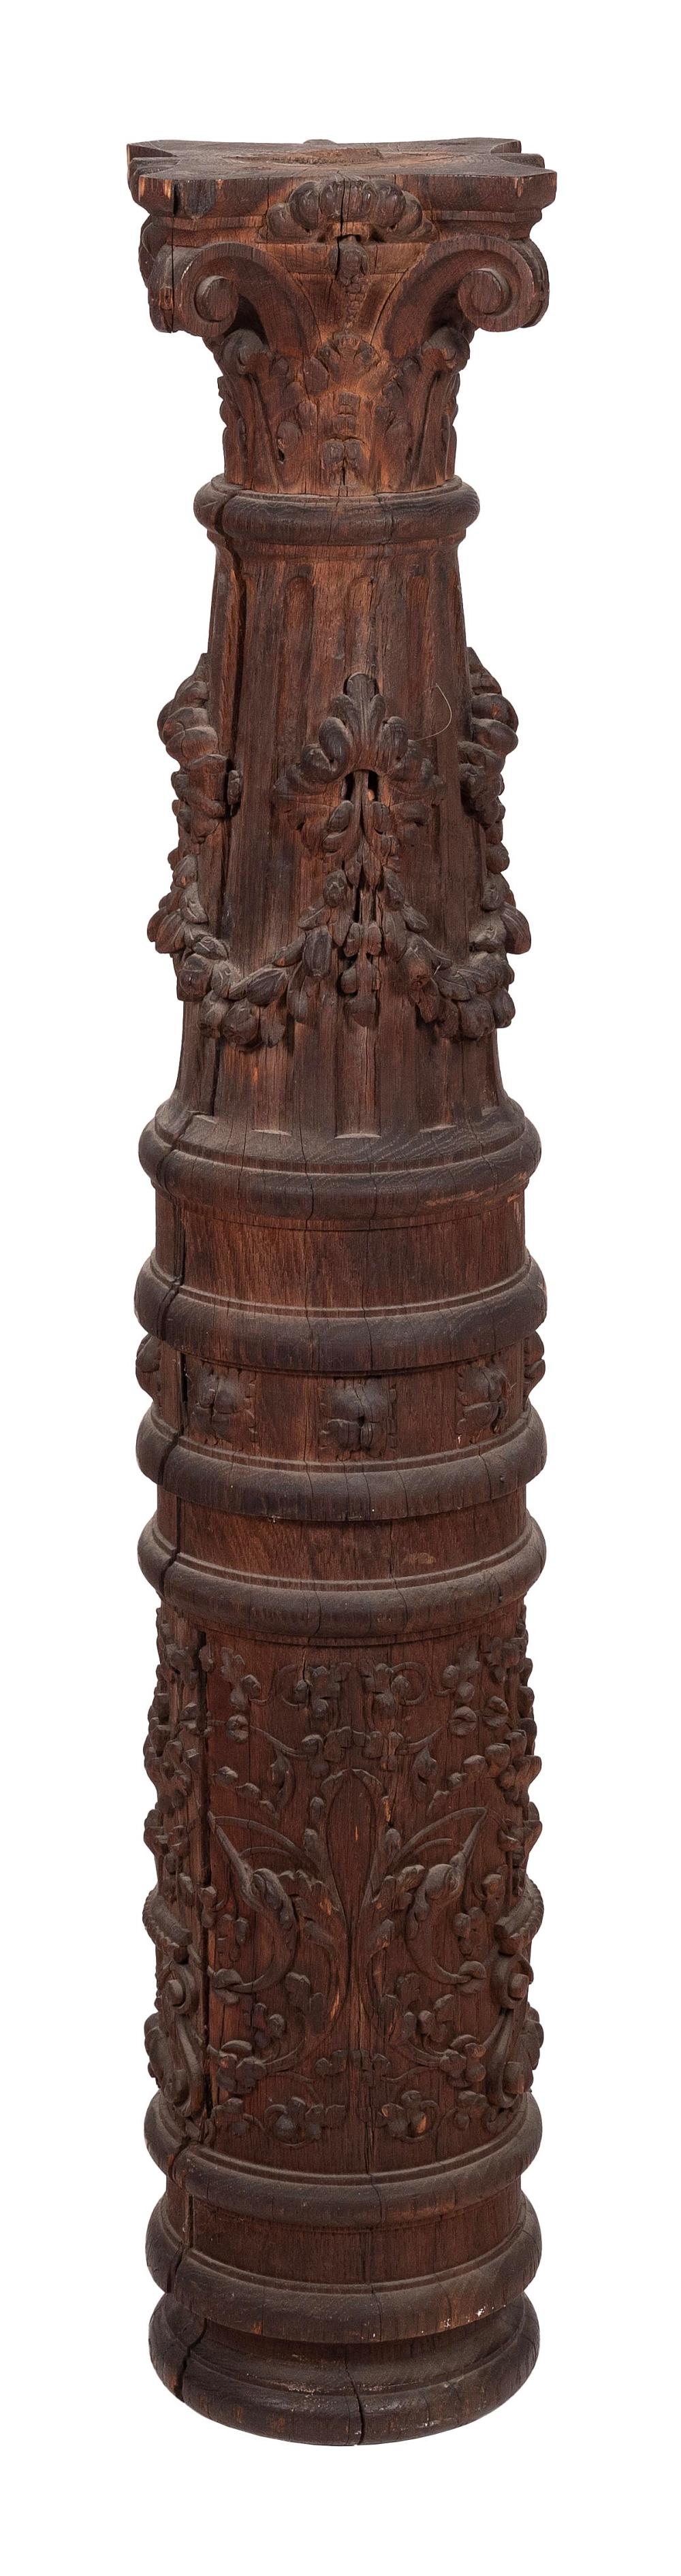 CONTINENTAL CARVED COLUMN 19TH 2f1bbd